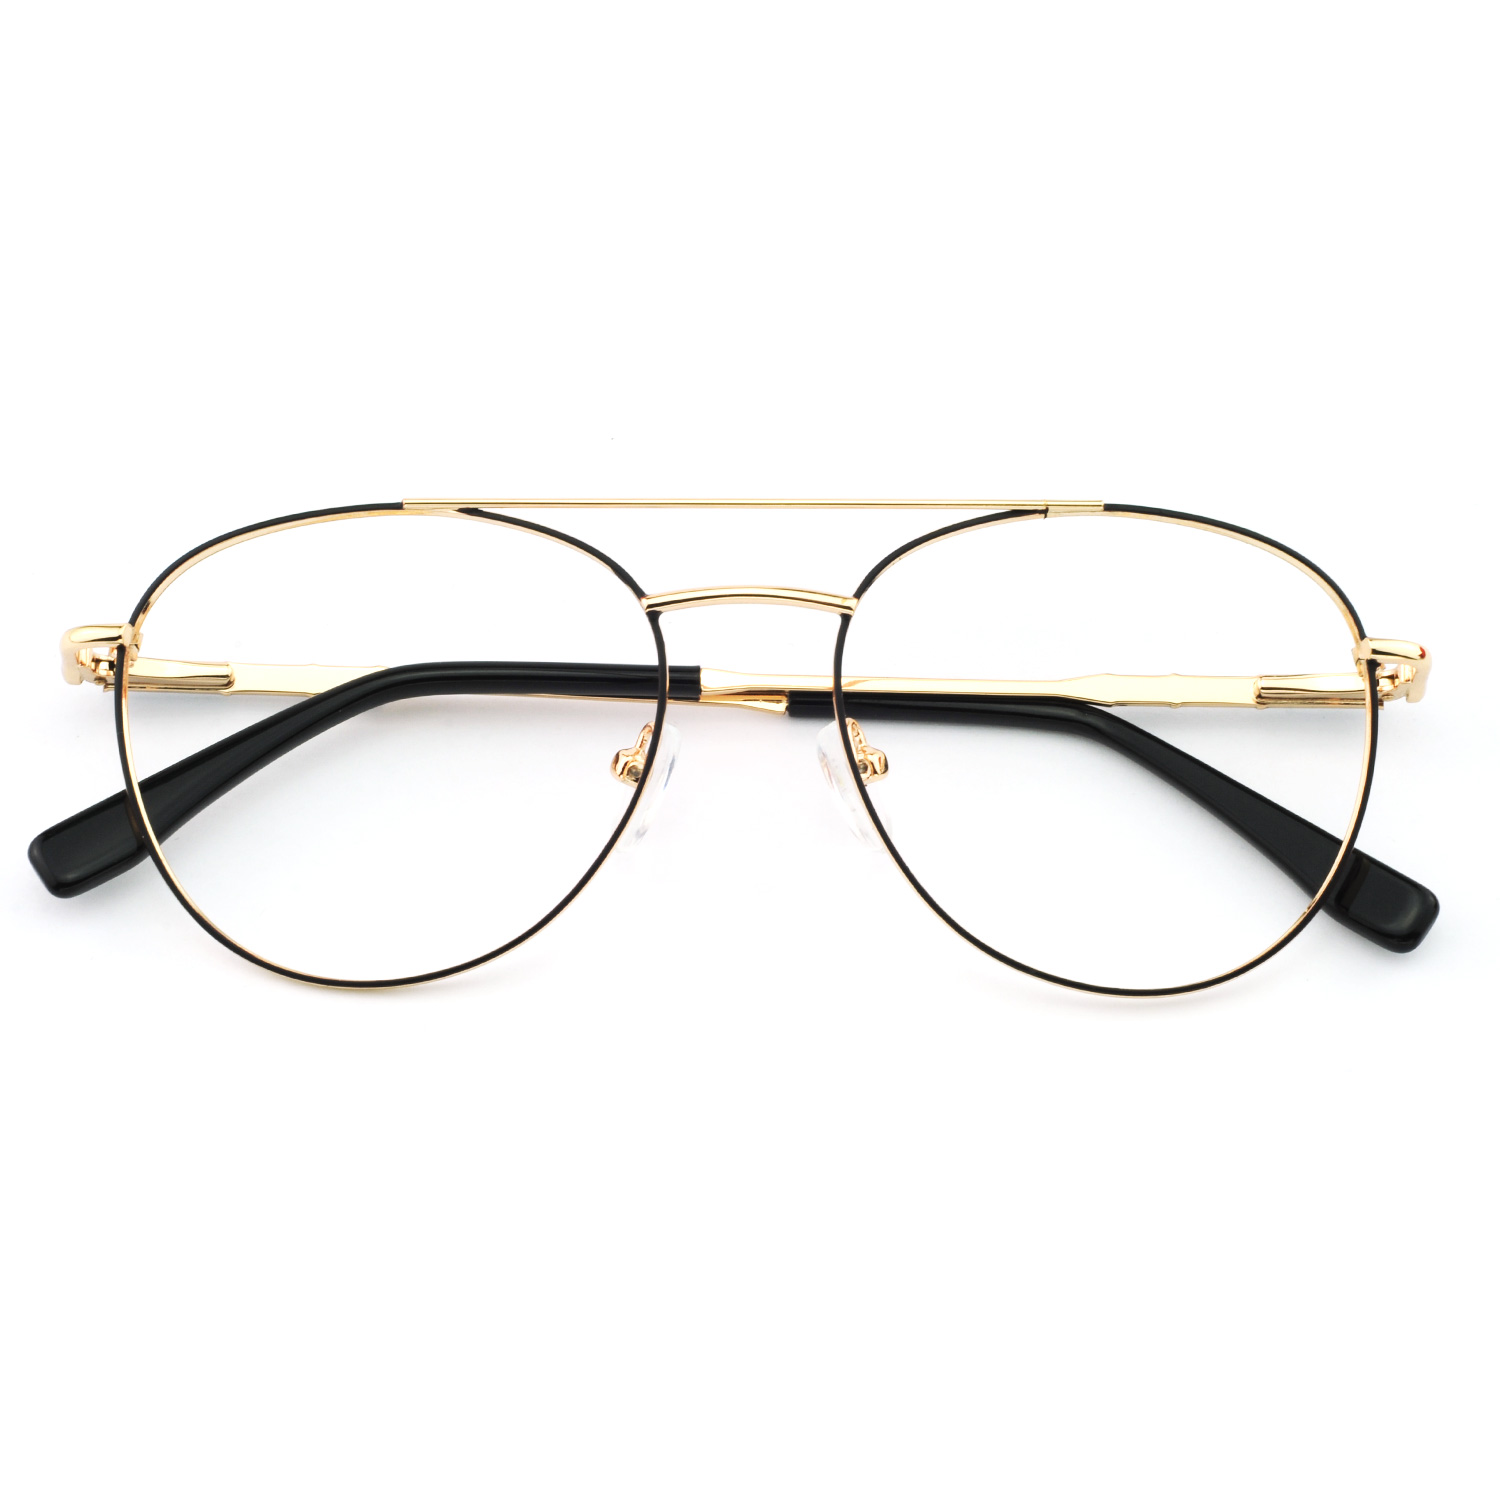 Double Bridge Round Stainless High Quality Fancy Big Women Optical Frame Glasses